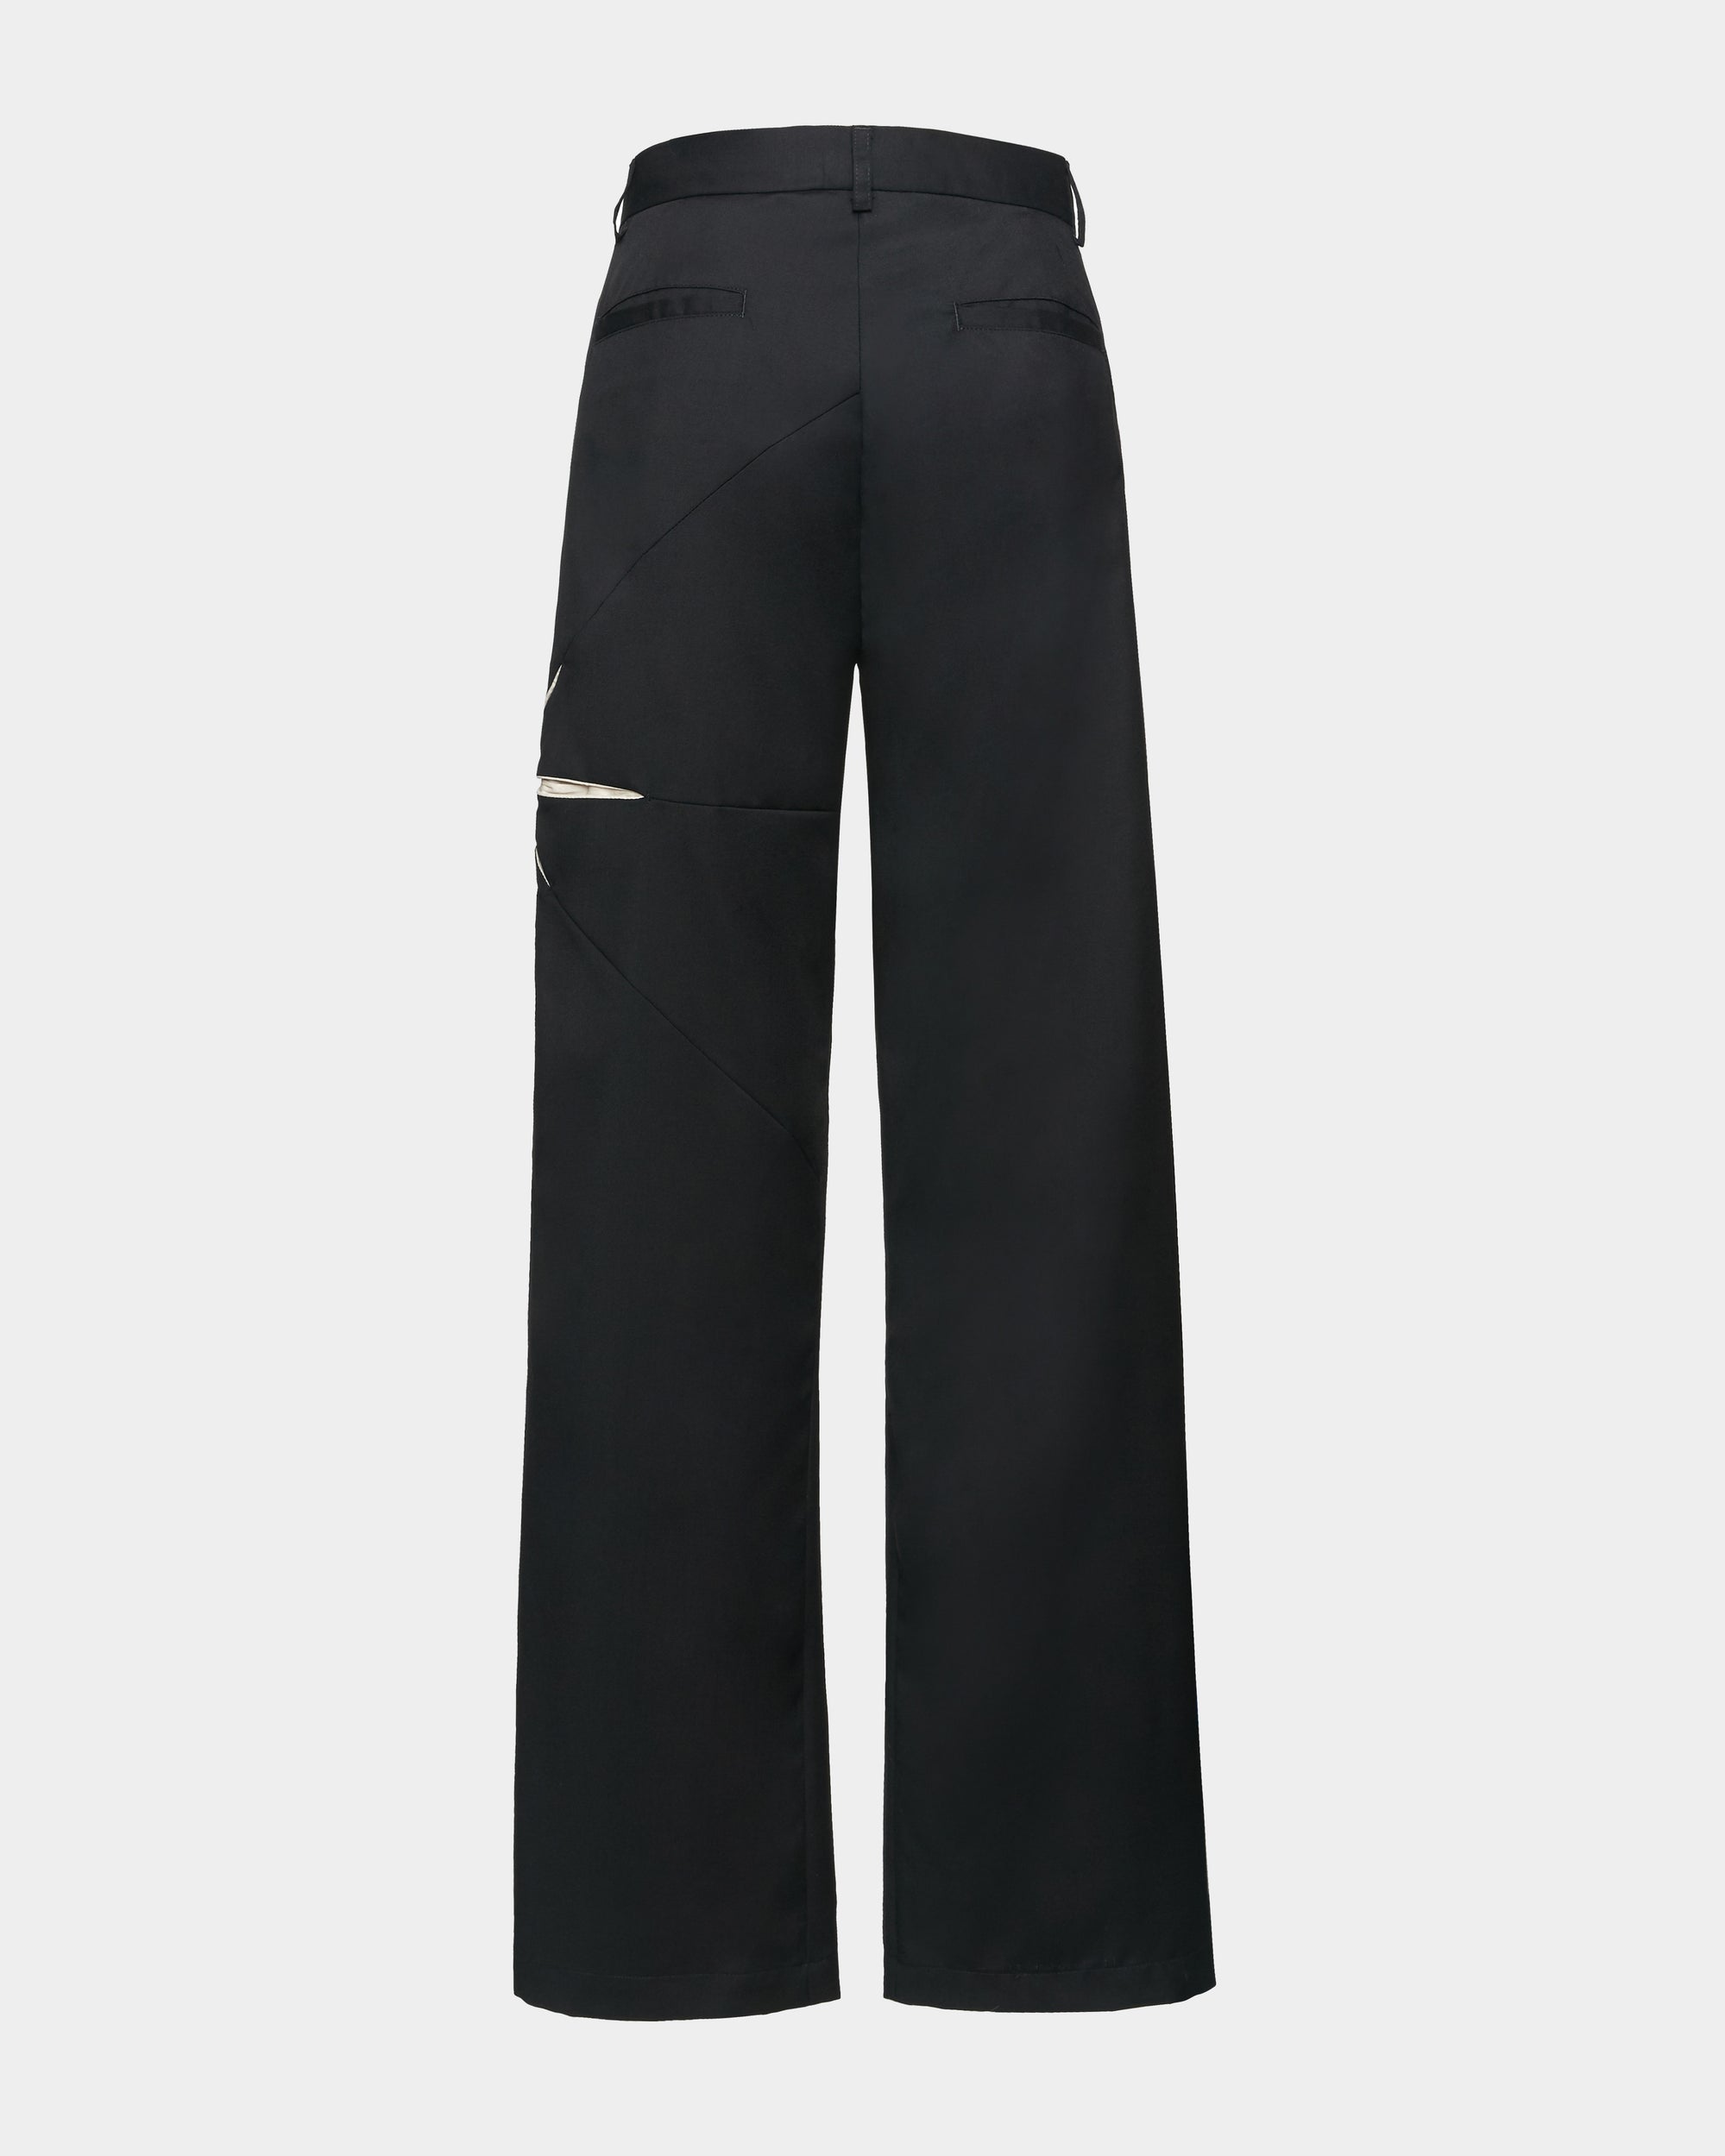 Origami Straight Fit Tailored Pants